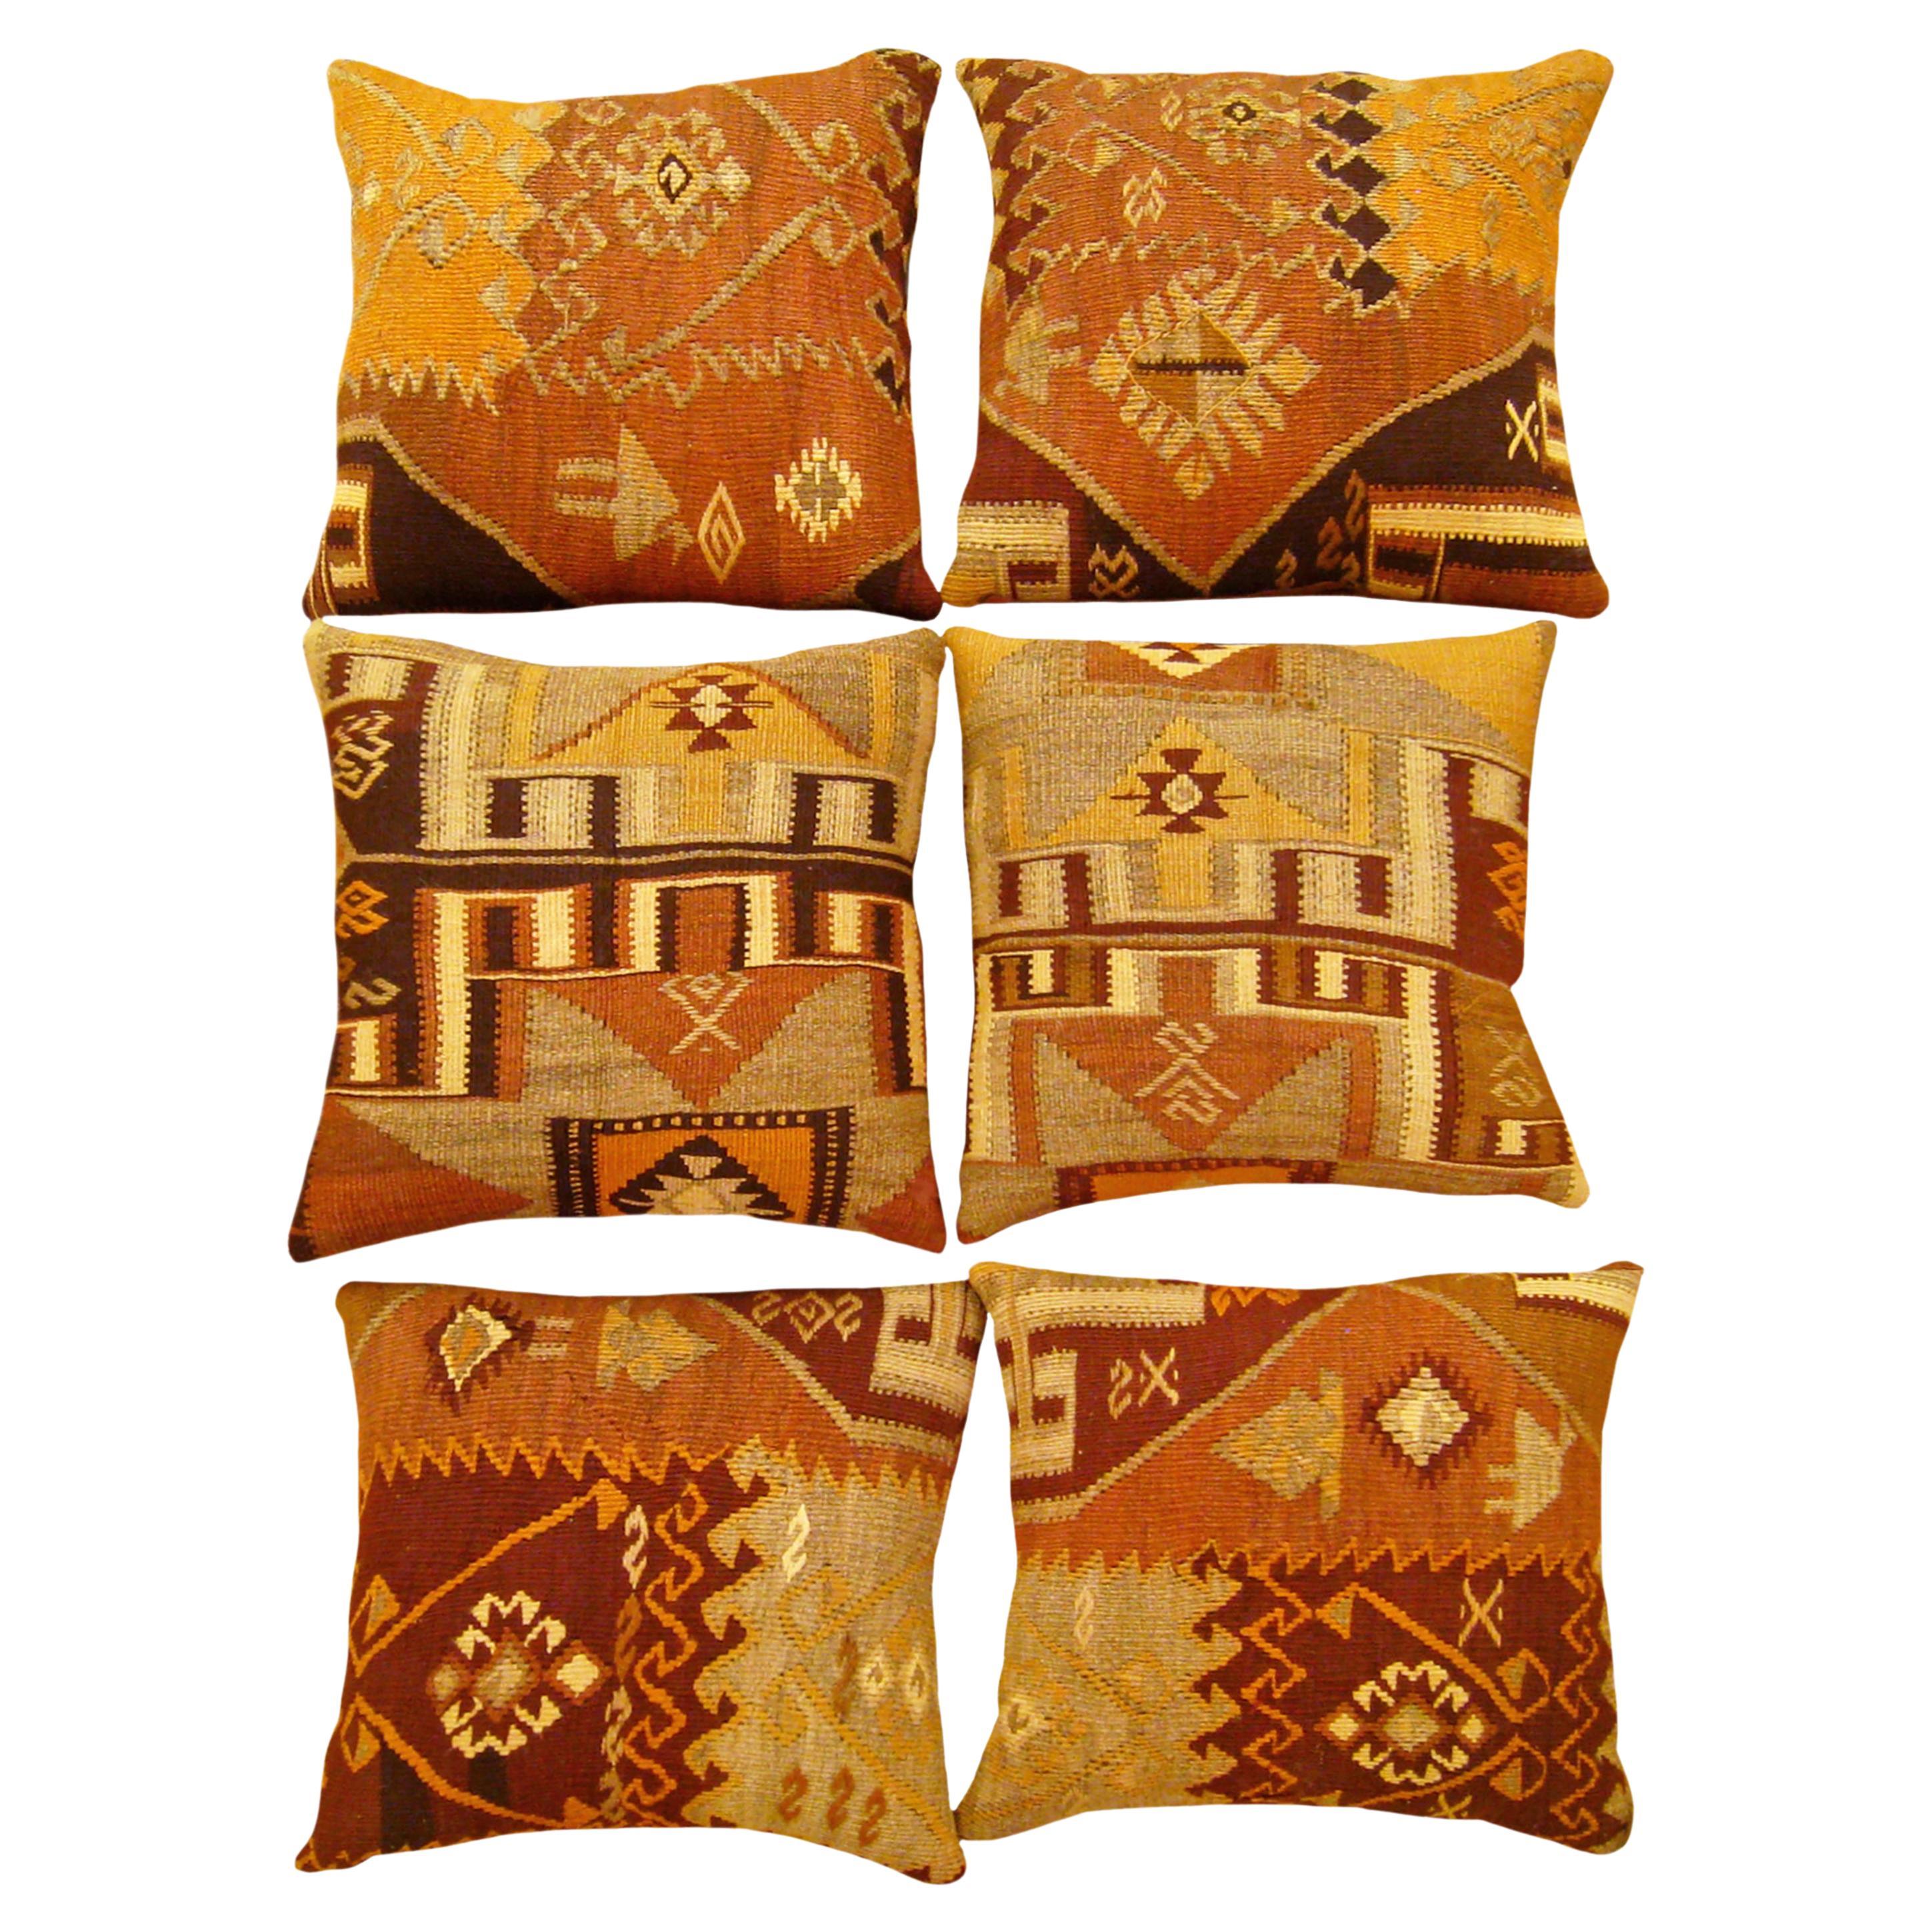 Set of Decorative Vintage Turkish Kilim Rug Pillows with Geometric Abstracts For Sale